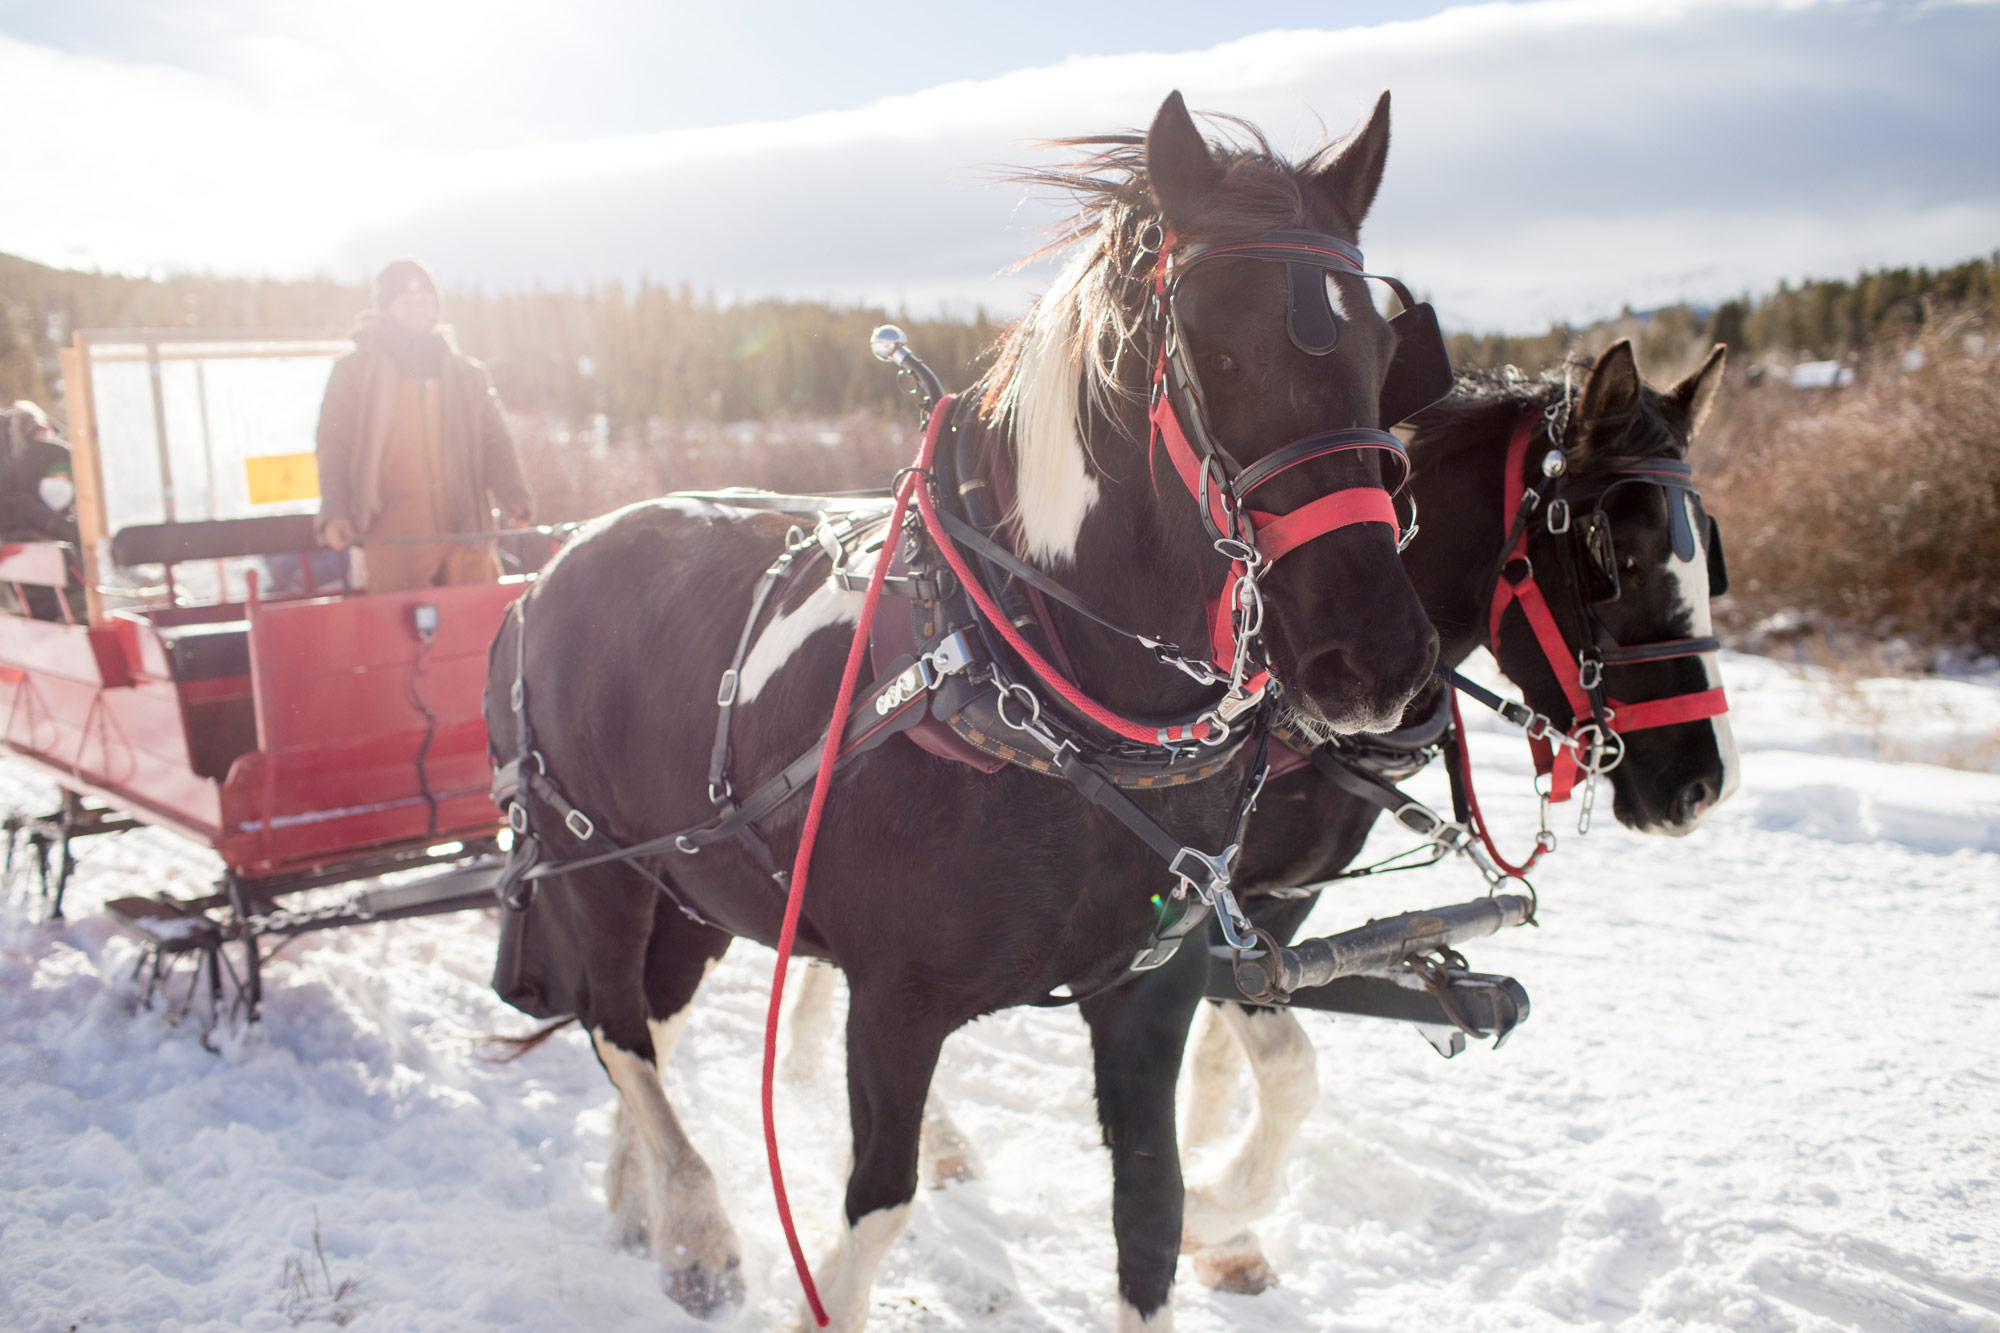 Walter’s Sleigh Rides: Visiting in winter? Dash through the snow with Walter’s Sleigh Rides. Finish your country ride with tasty hot cocoa and warm cinnamon buns.